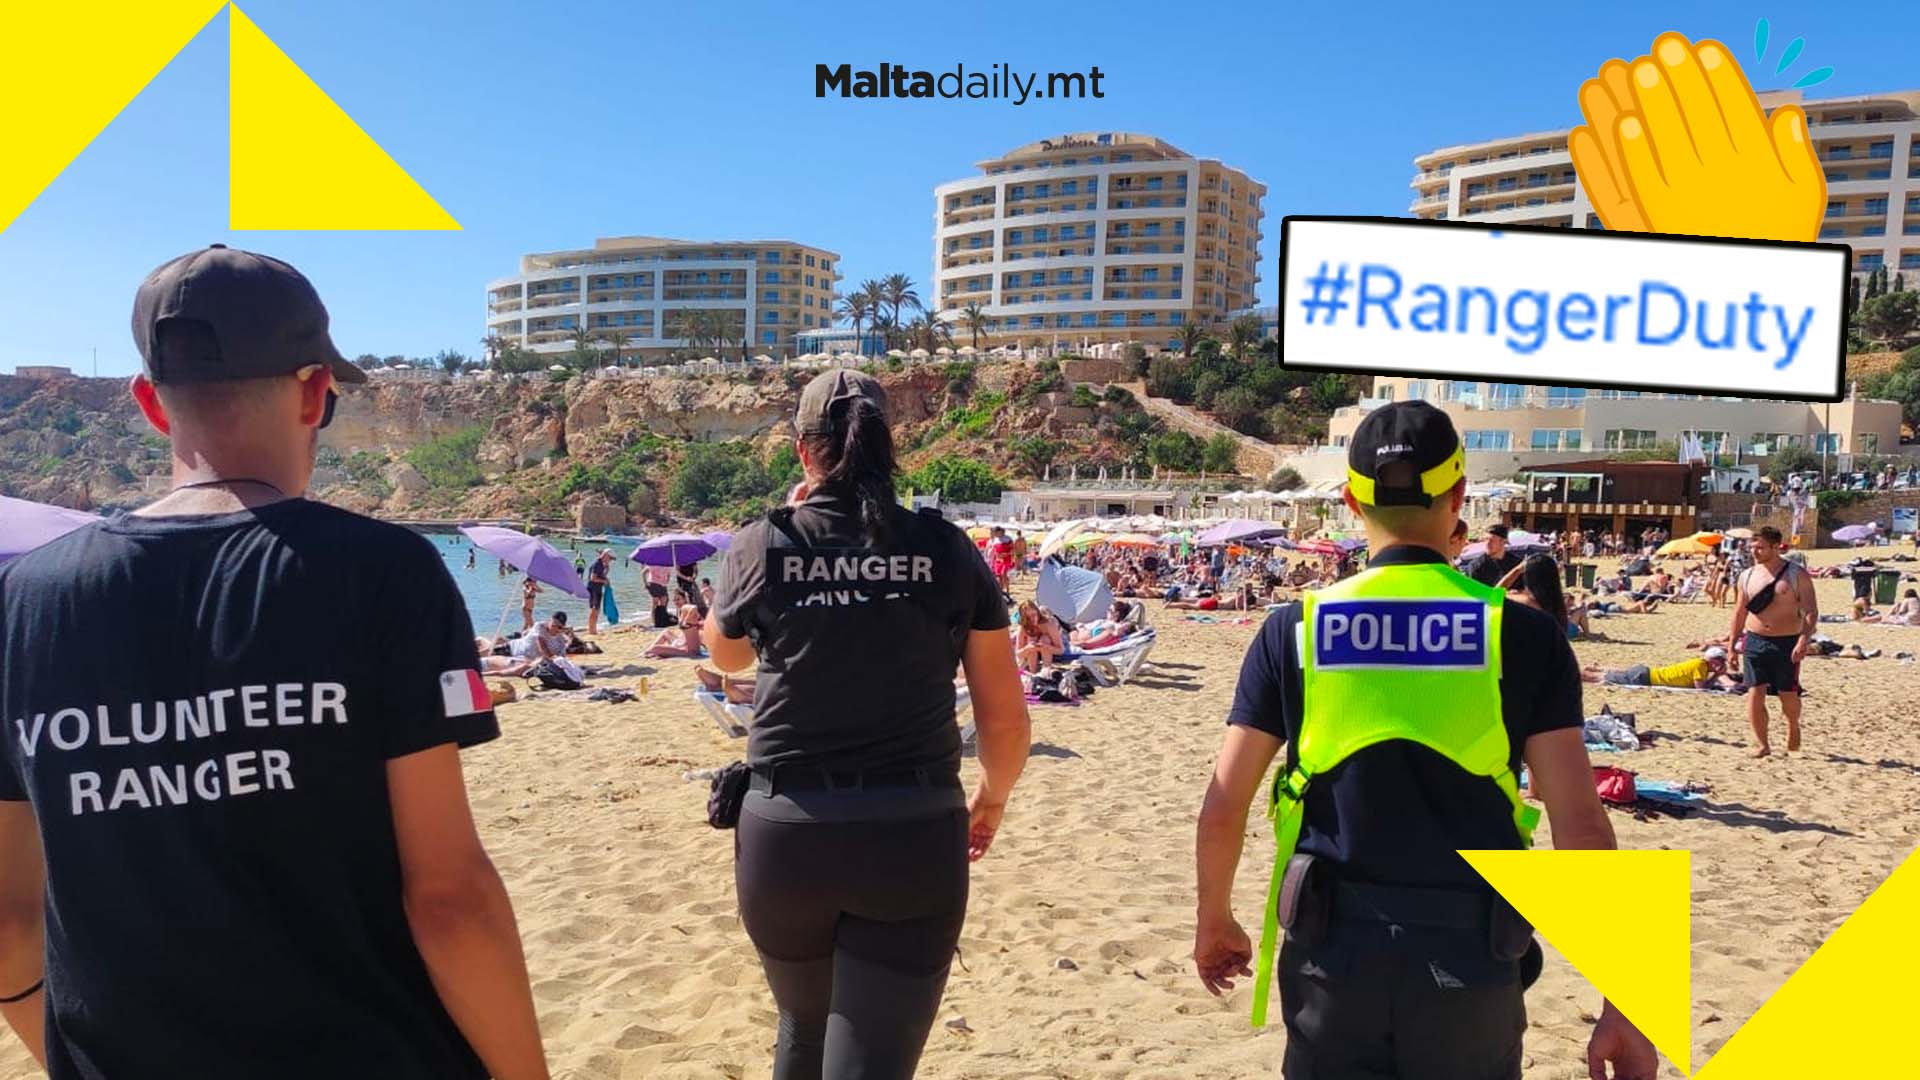 Man removed from beach by police for stalking group of girls